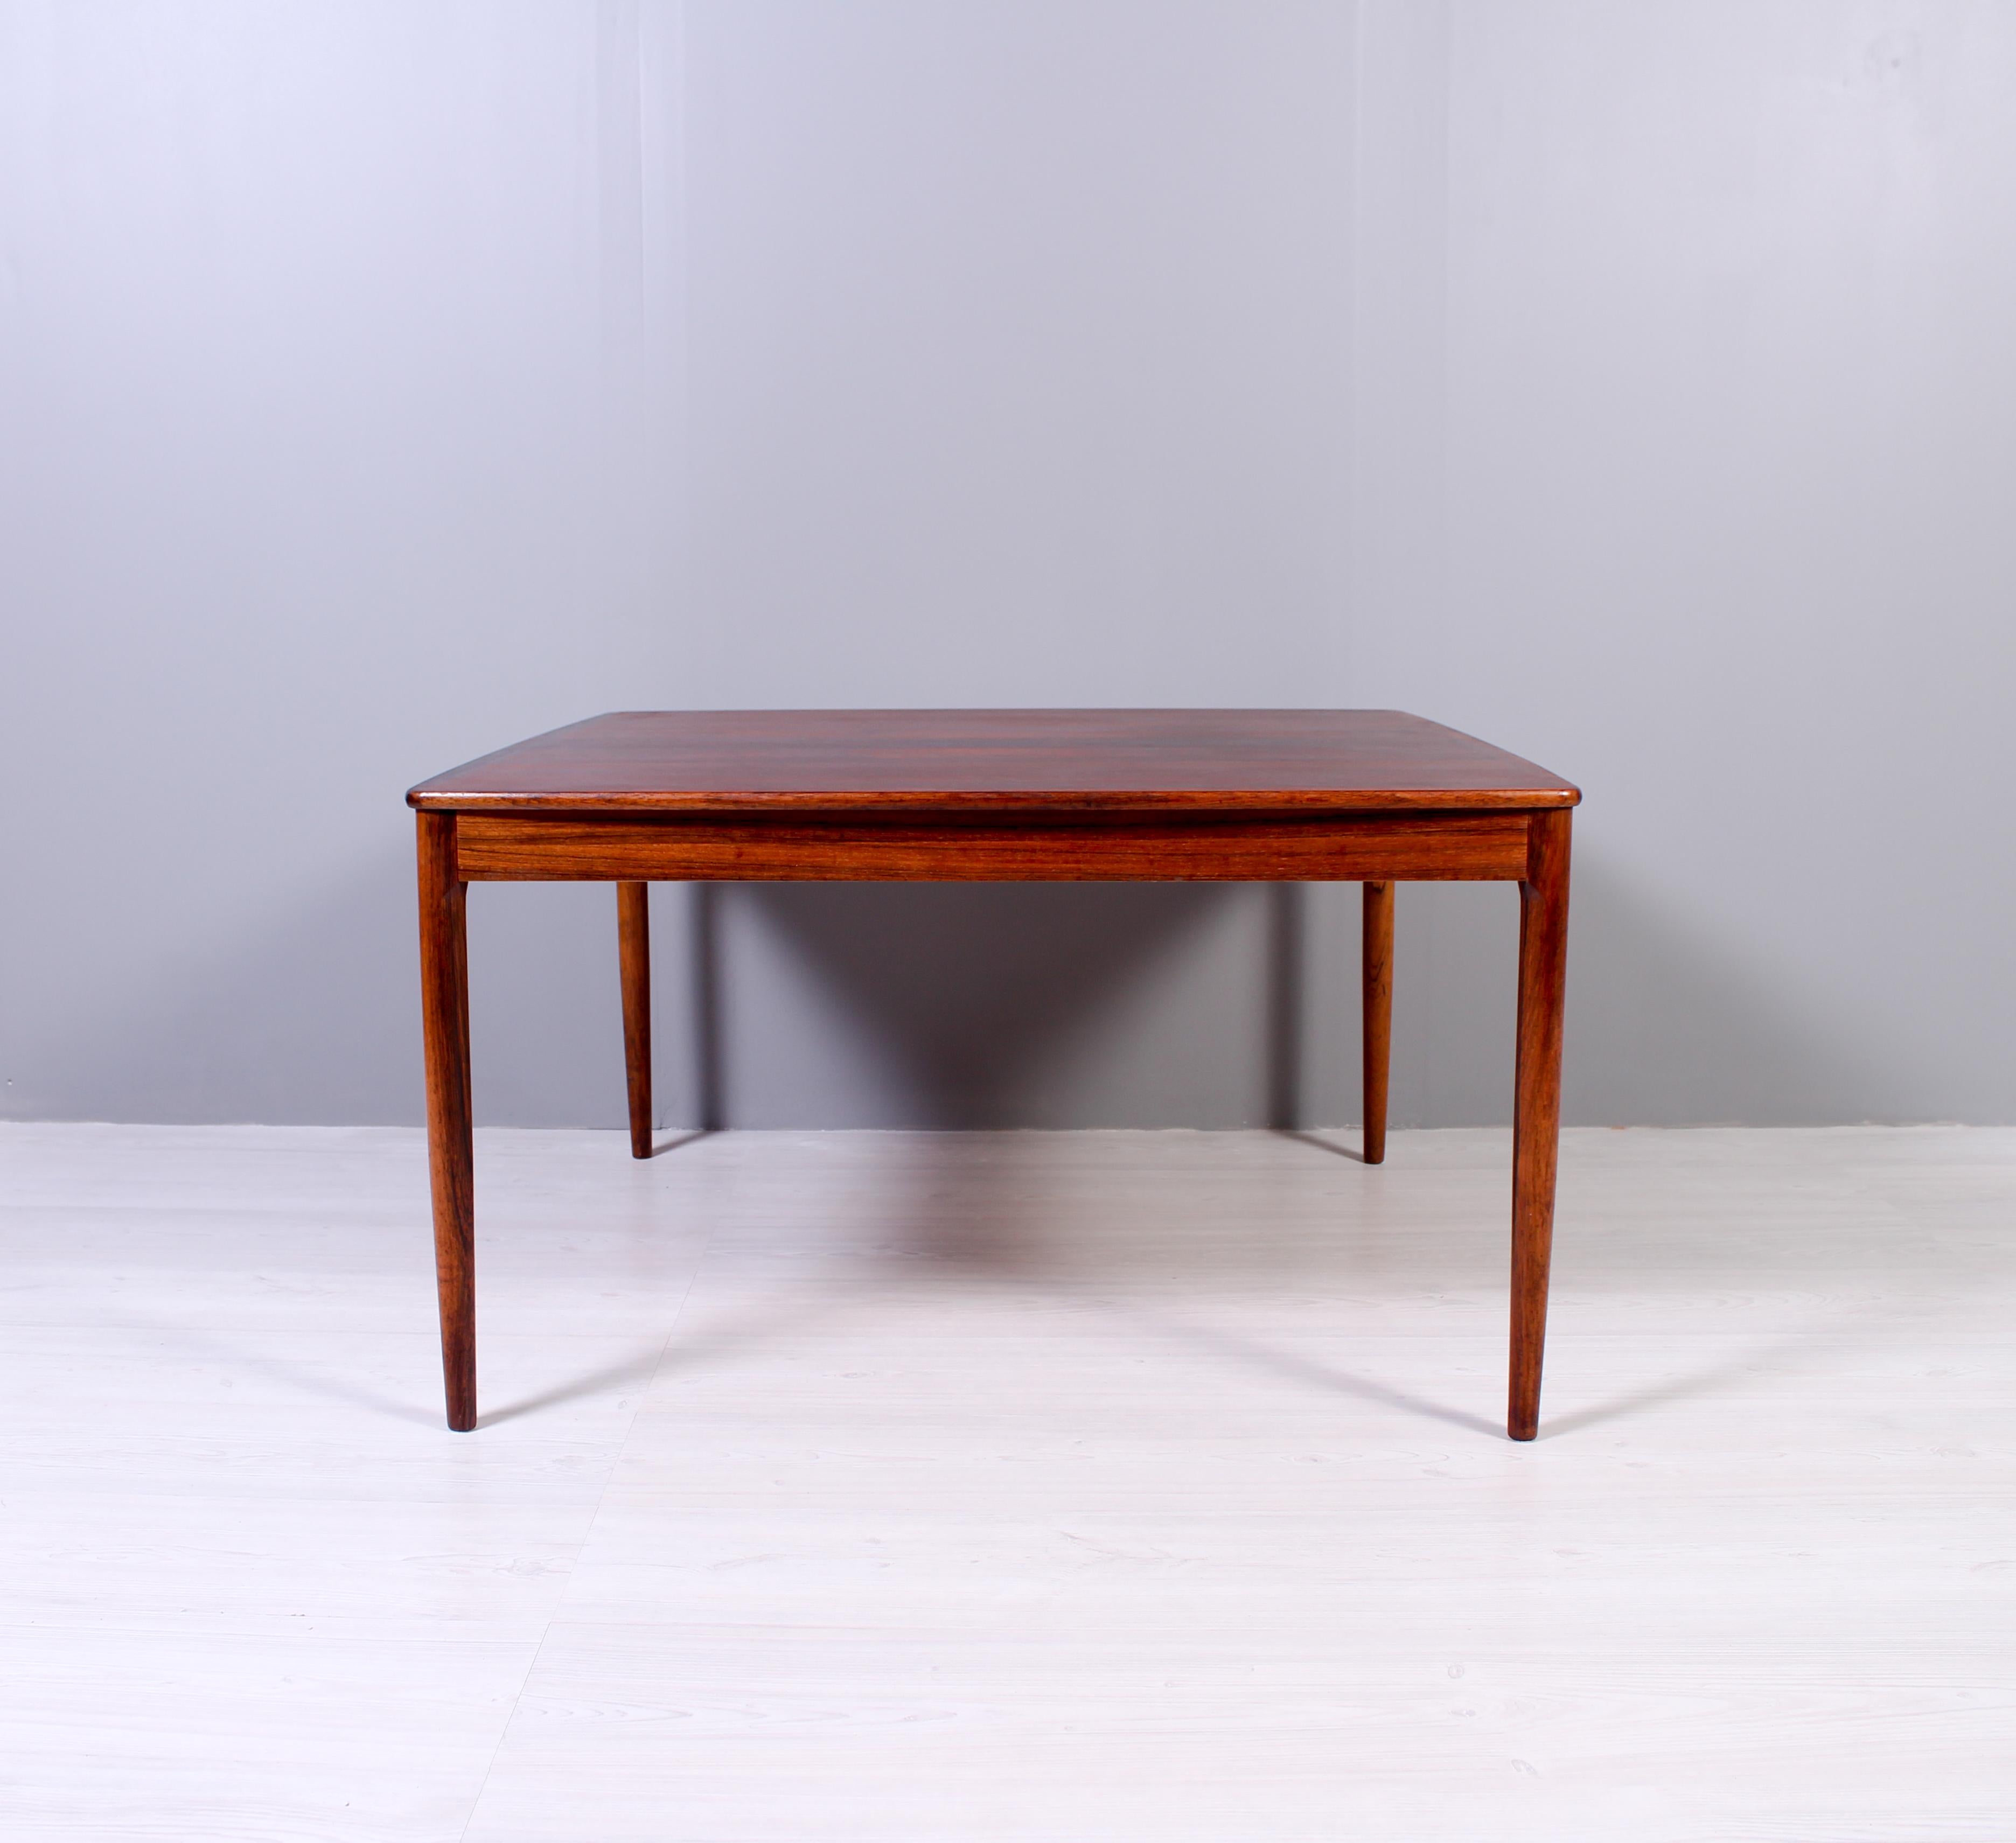 A rectangular rosewood coffee table designed by Swedish designer Yngvar Sandström. The table was priduced by Swedish company Seffle Möbelfabrik in the late 1950s. Very good vintage condition with refinished table top.